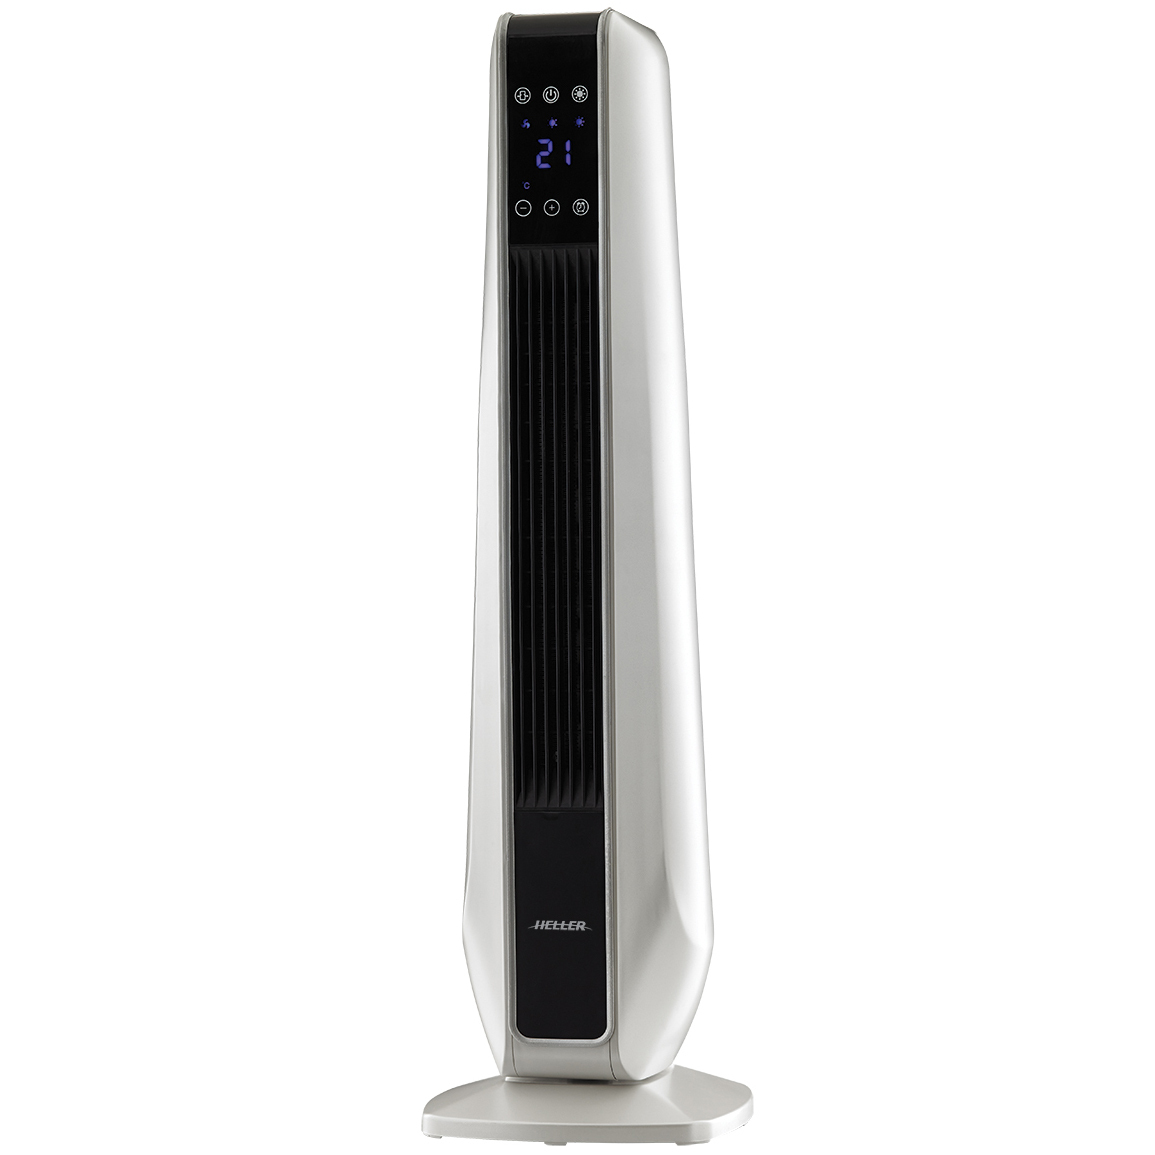 NEW 2400W Heller Ceramic Tower Heater with Remote | eBay